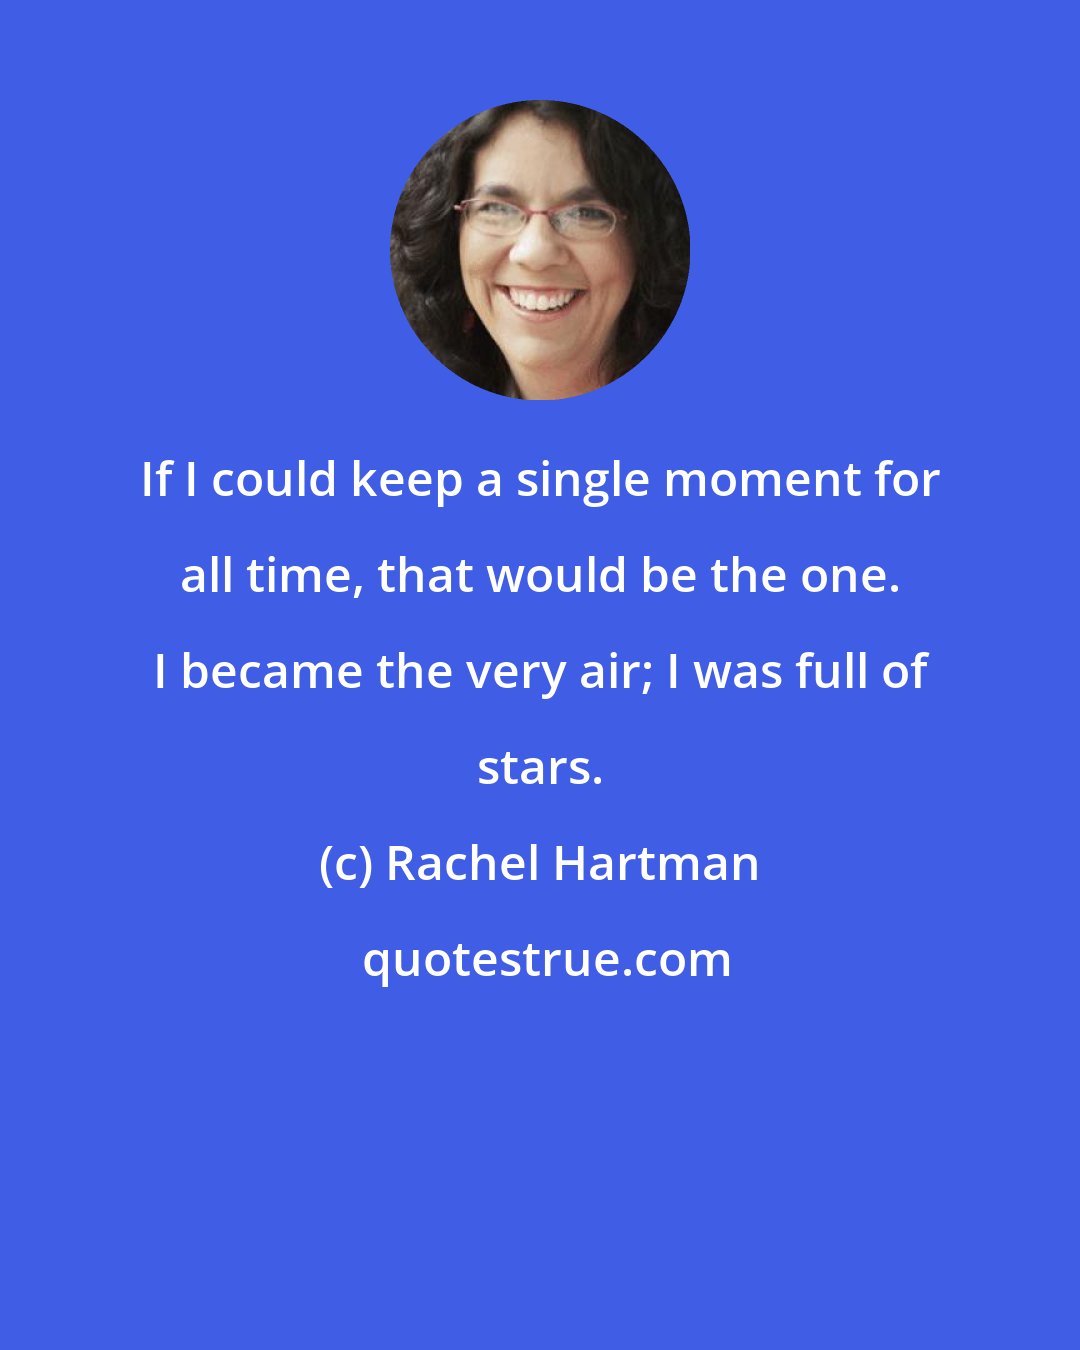 Rachel Hartman: If I could keep a single moment for all time, that would be the one. I became the very air; I was full of stars.